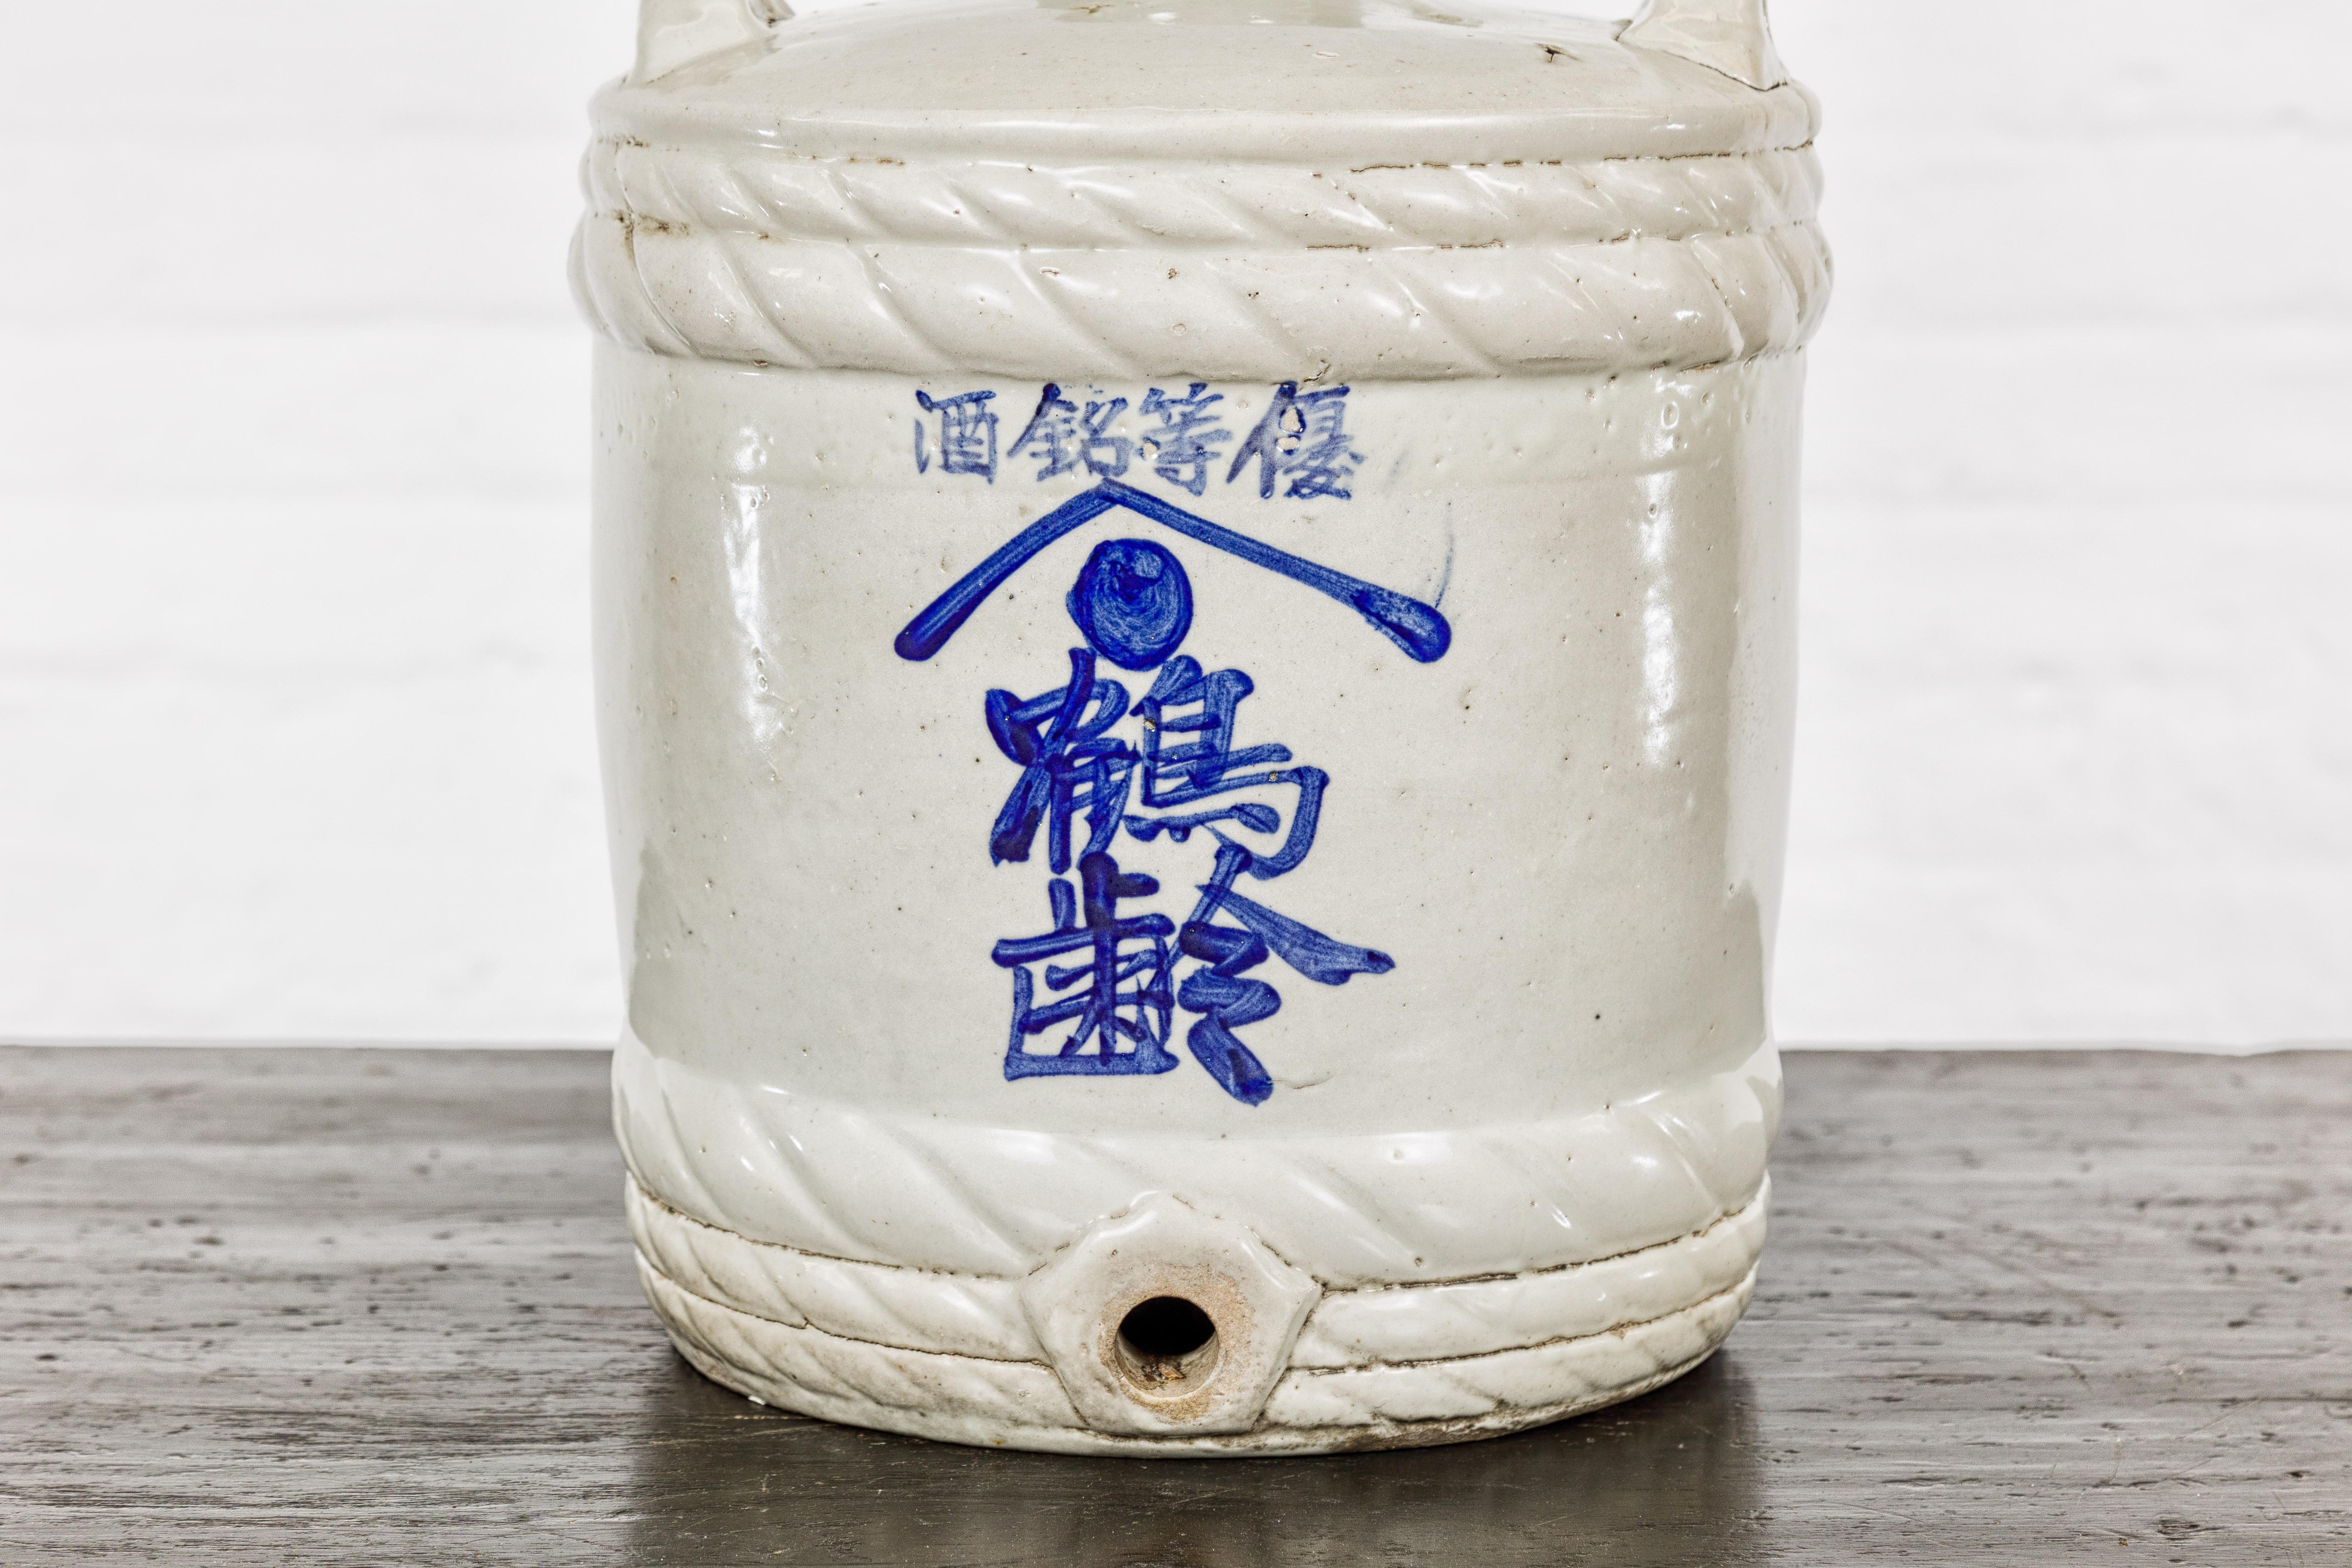 Japanese Meiji Period 19th Century Barrel Shaped Sake Jar with Calligraphy For Sale 1